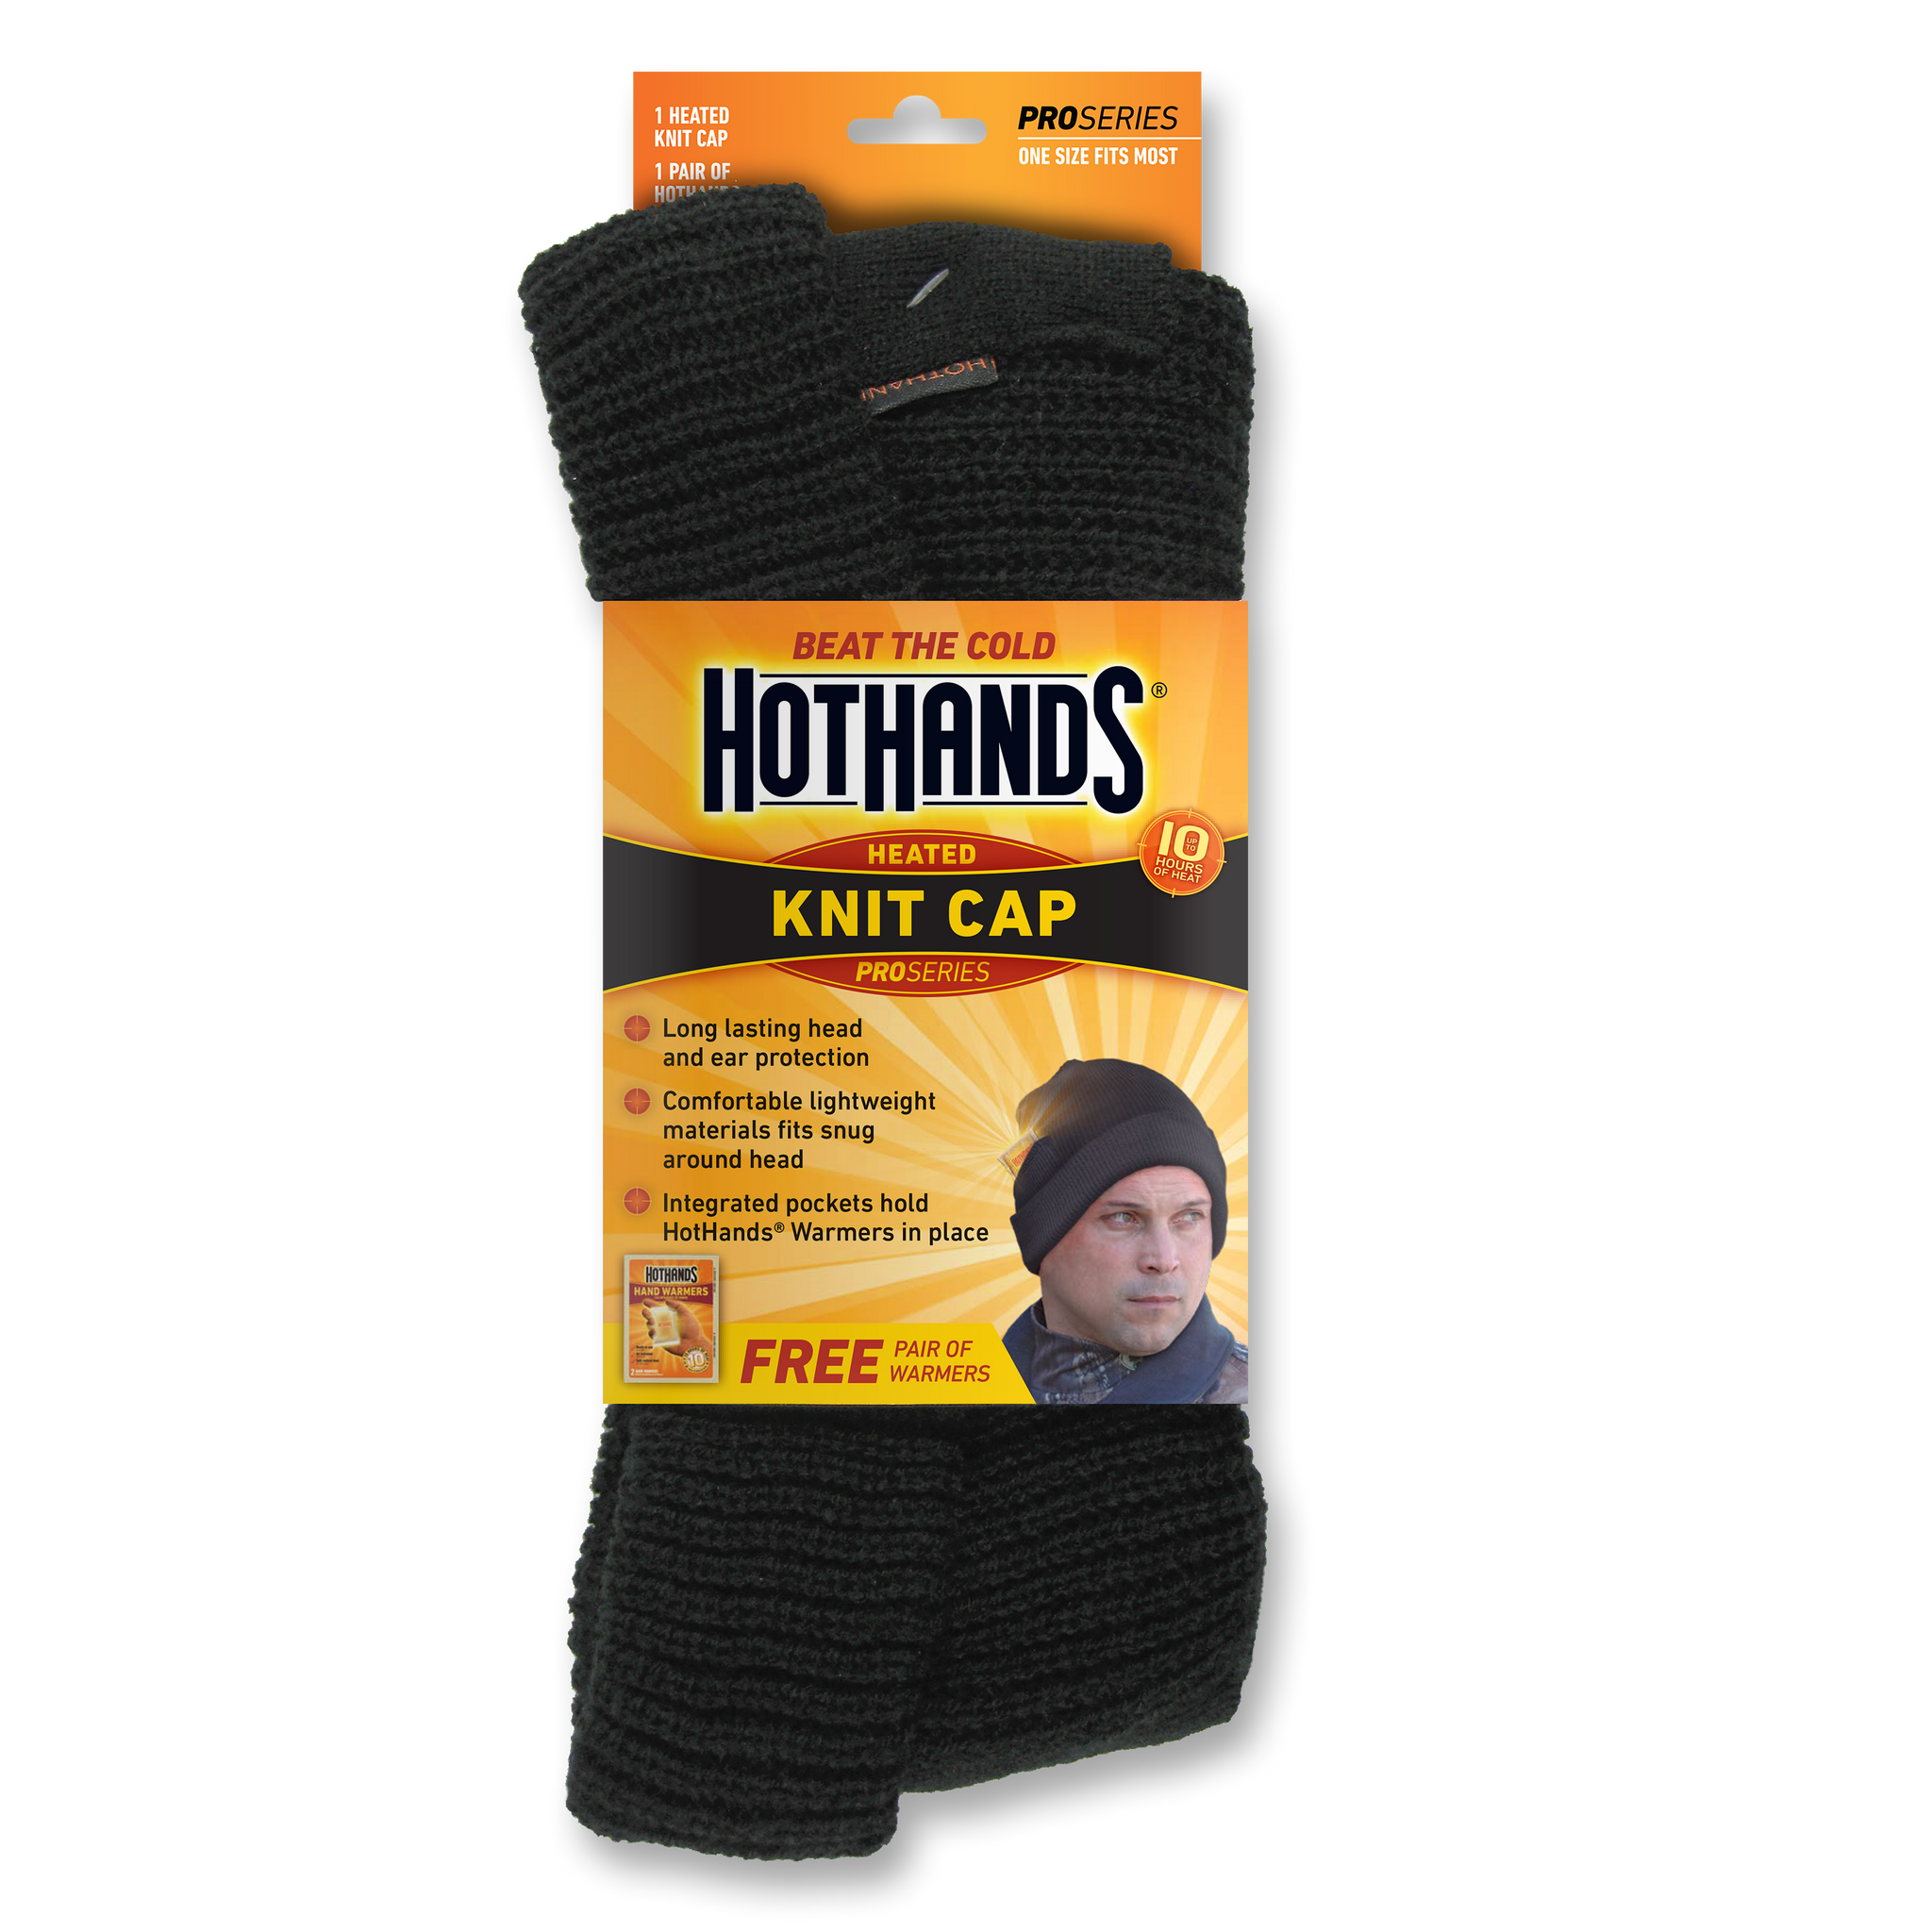 HotHands Black Watch Cap - Includes 2 warmers | HotHands Direct heated watchcap, heated hunting cap, black heated hat